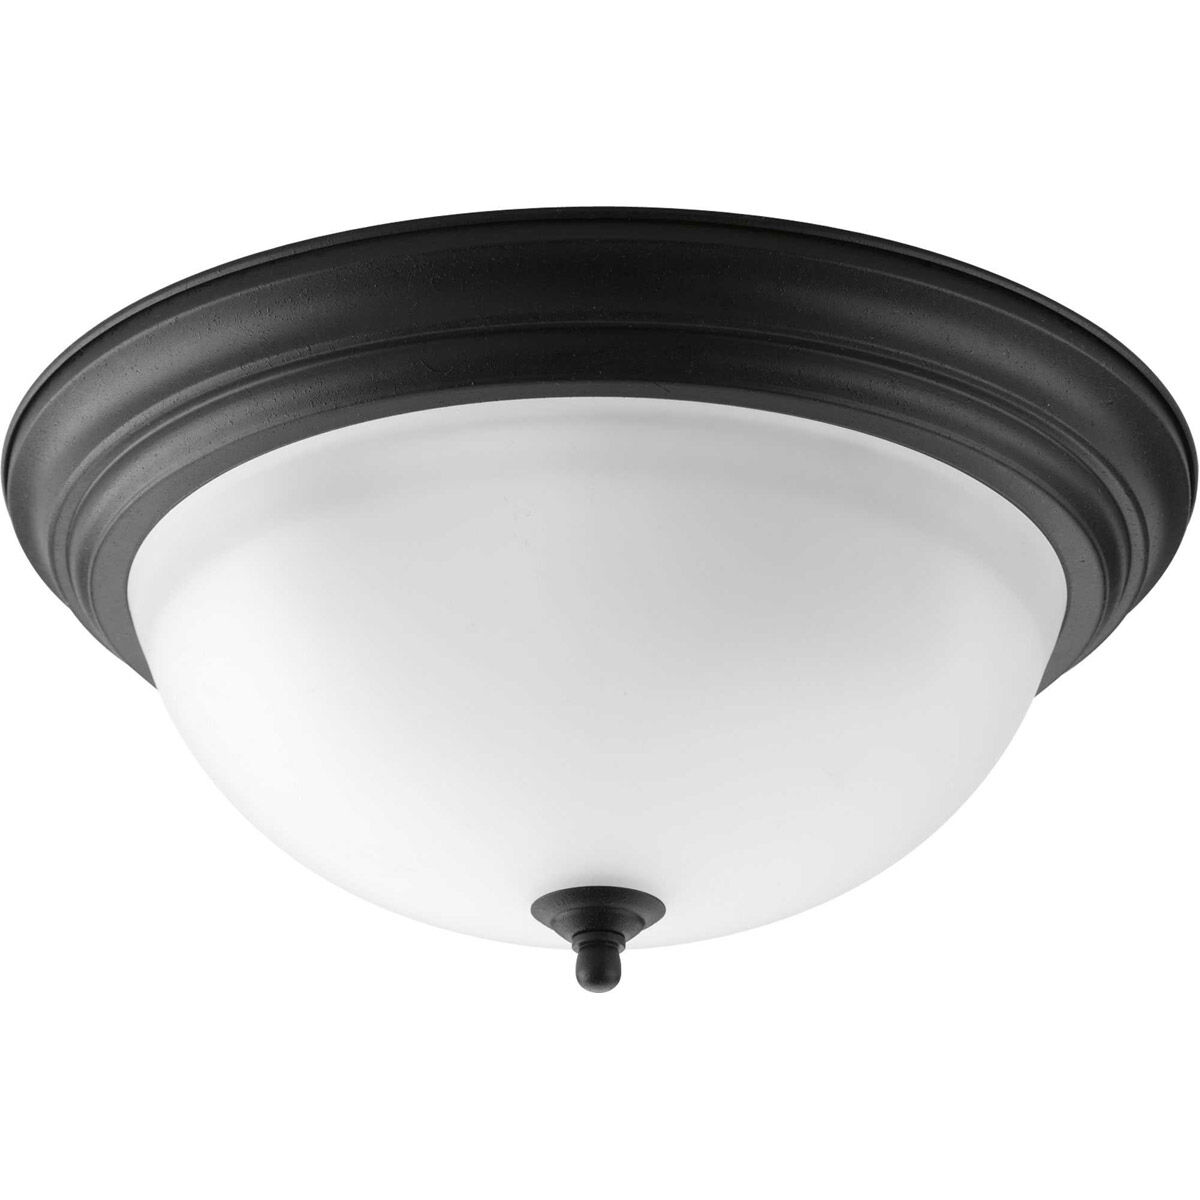 Dome Glass CTC 3 Light 15 inch Brushed Nickel Flush Mount Ceiling Light in  15-1/4